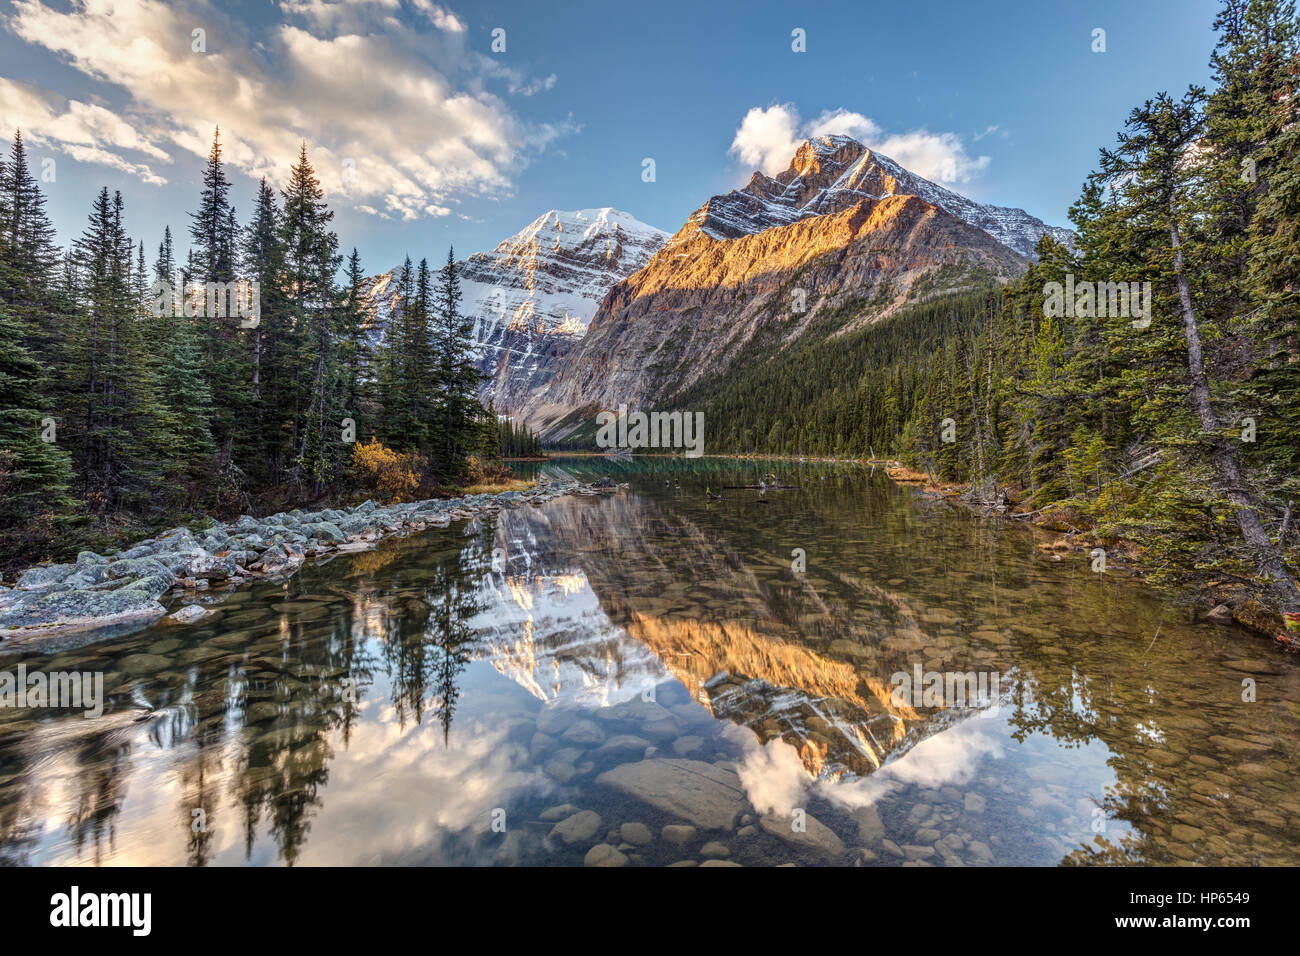 Sunrise and reflection of Mount Edith Cavell in the Rocky Mountains of Jasper National Park, Alberta, Canada Stock Photo